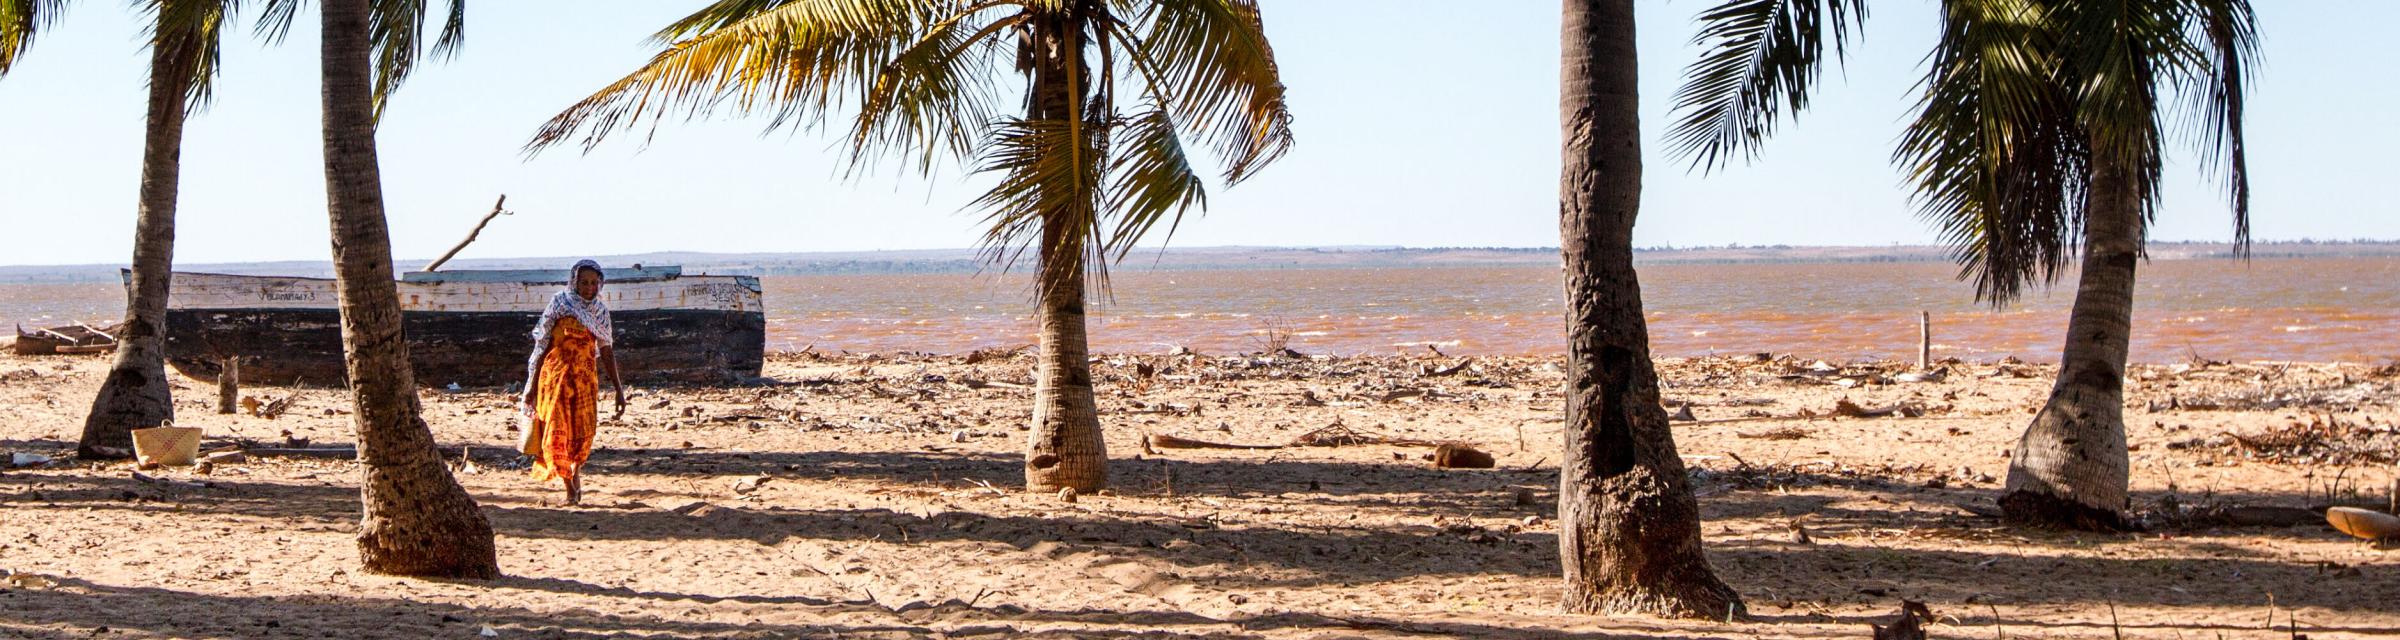 A woman walks along the beach in northern Madagascar. Photo by Rebecca Rempel.